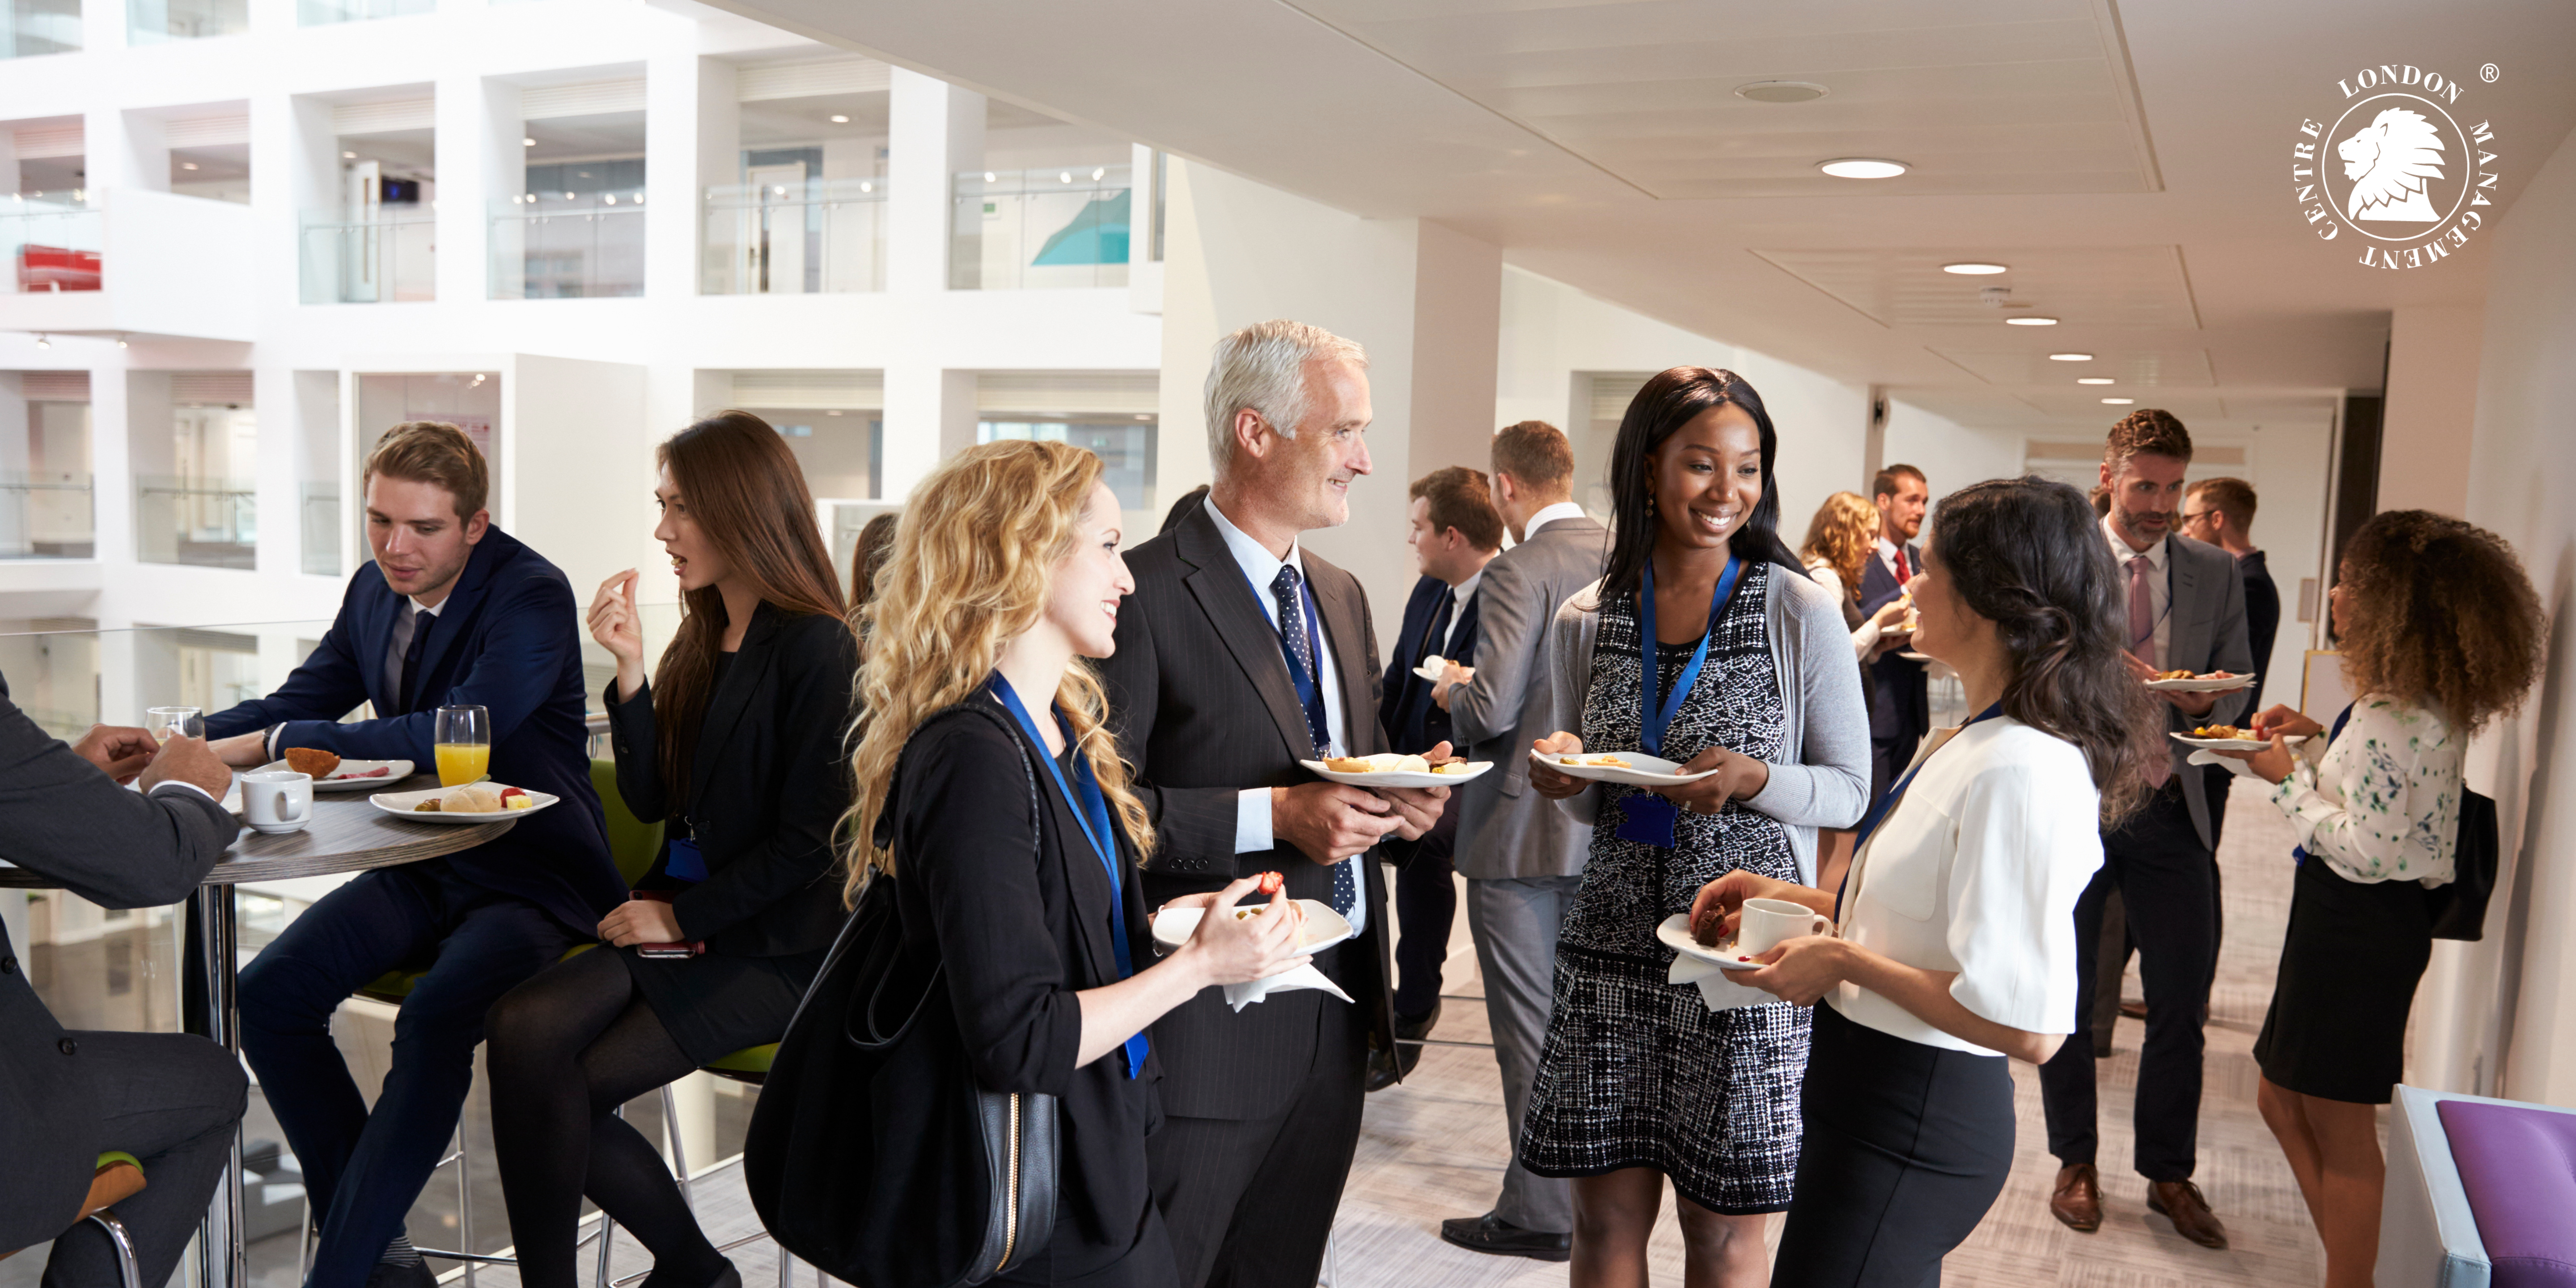 The Best Networking Strategies for Career Advancement